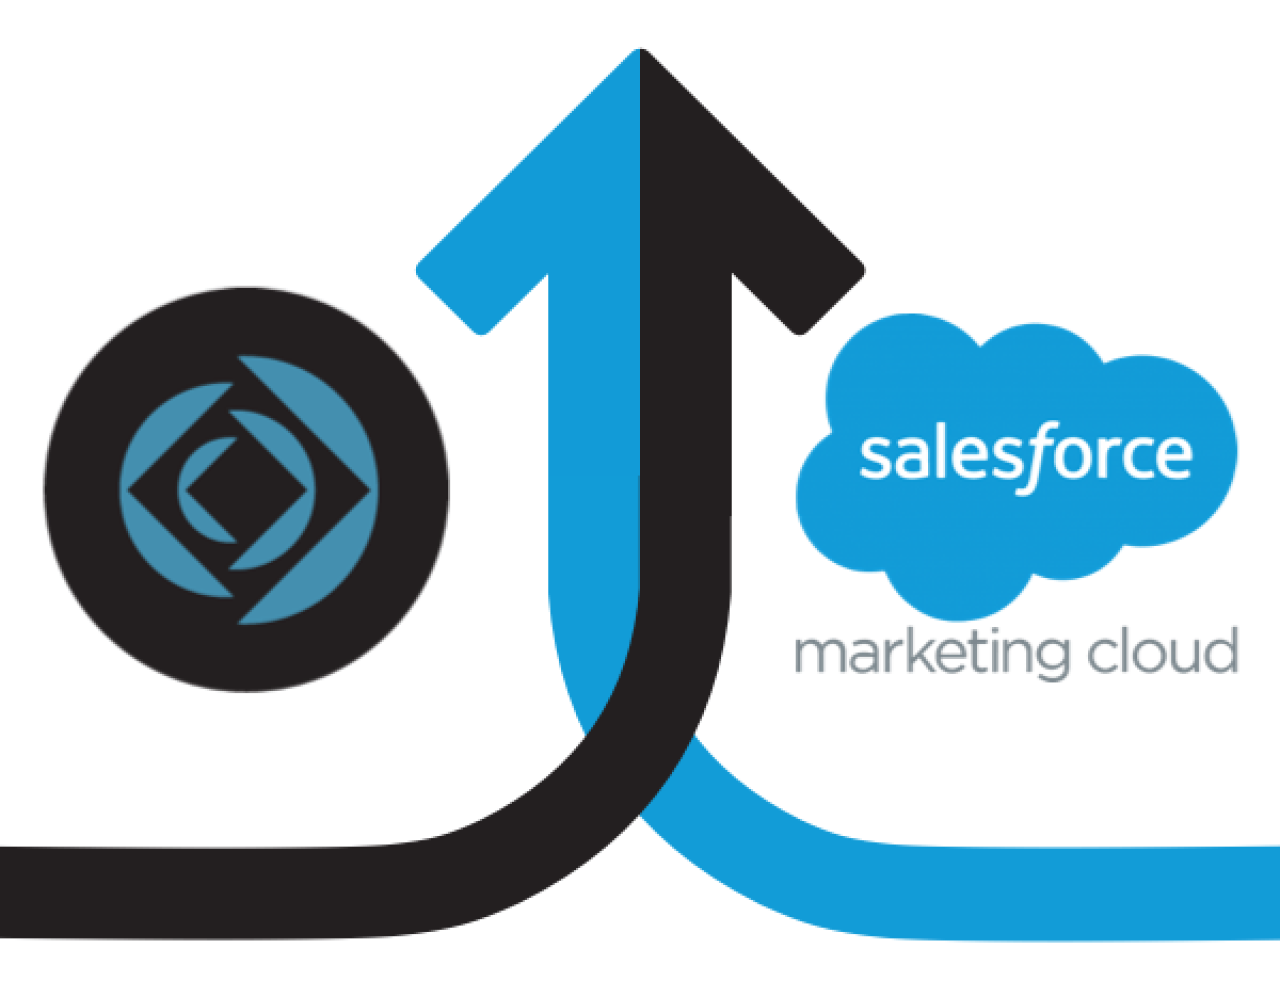 Claris logo and Salesforce logo, with two arrows from the left and the right merging into a single arrow.